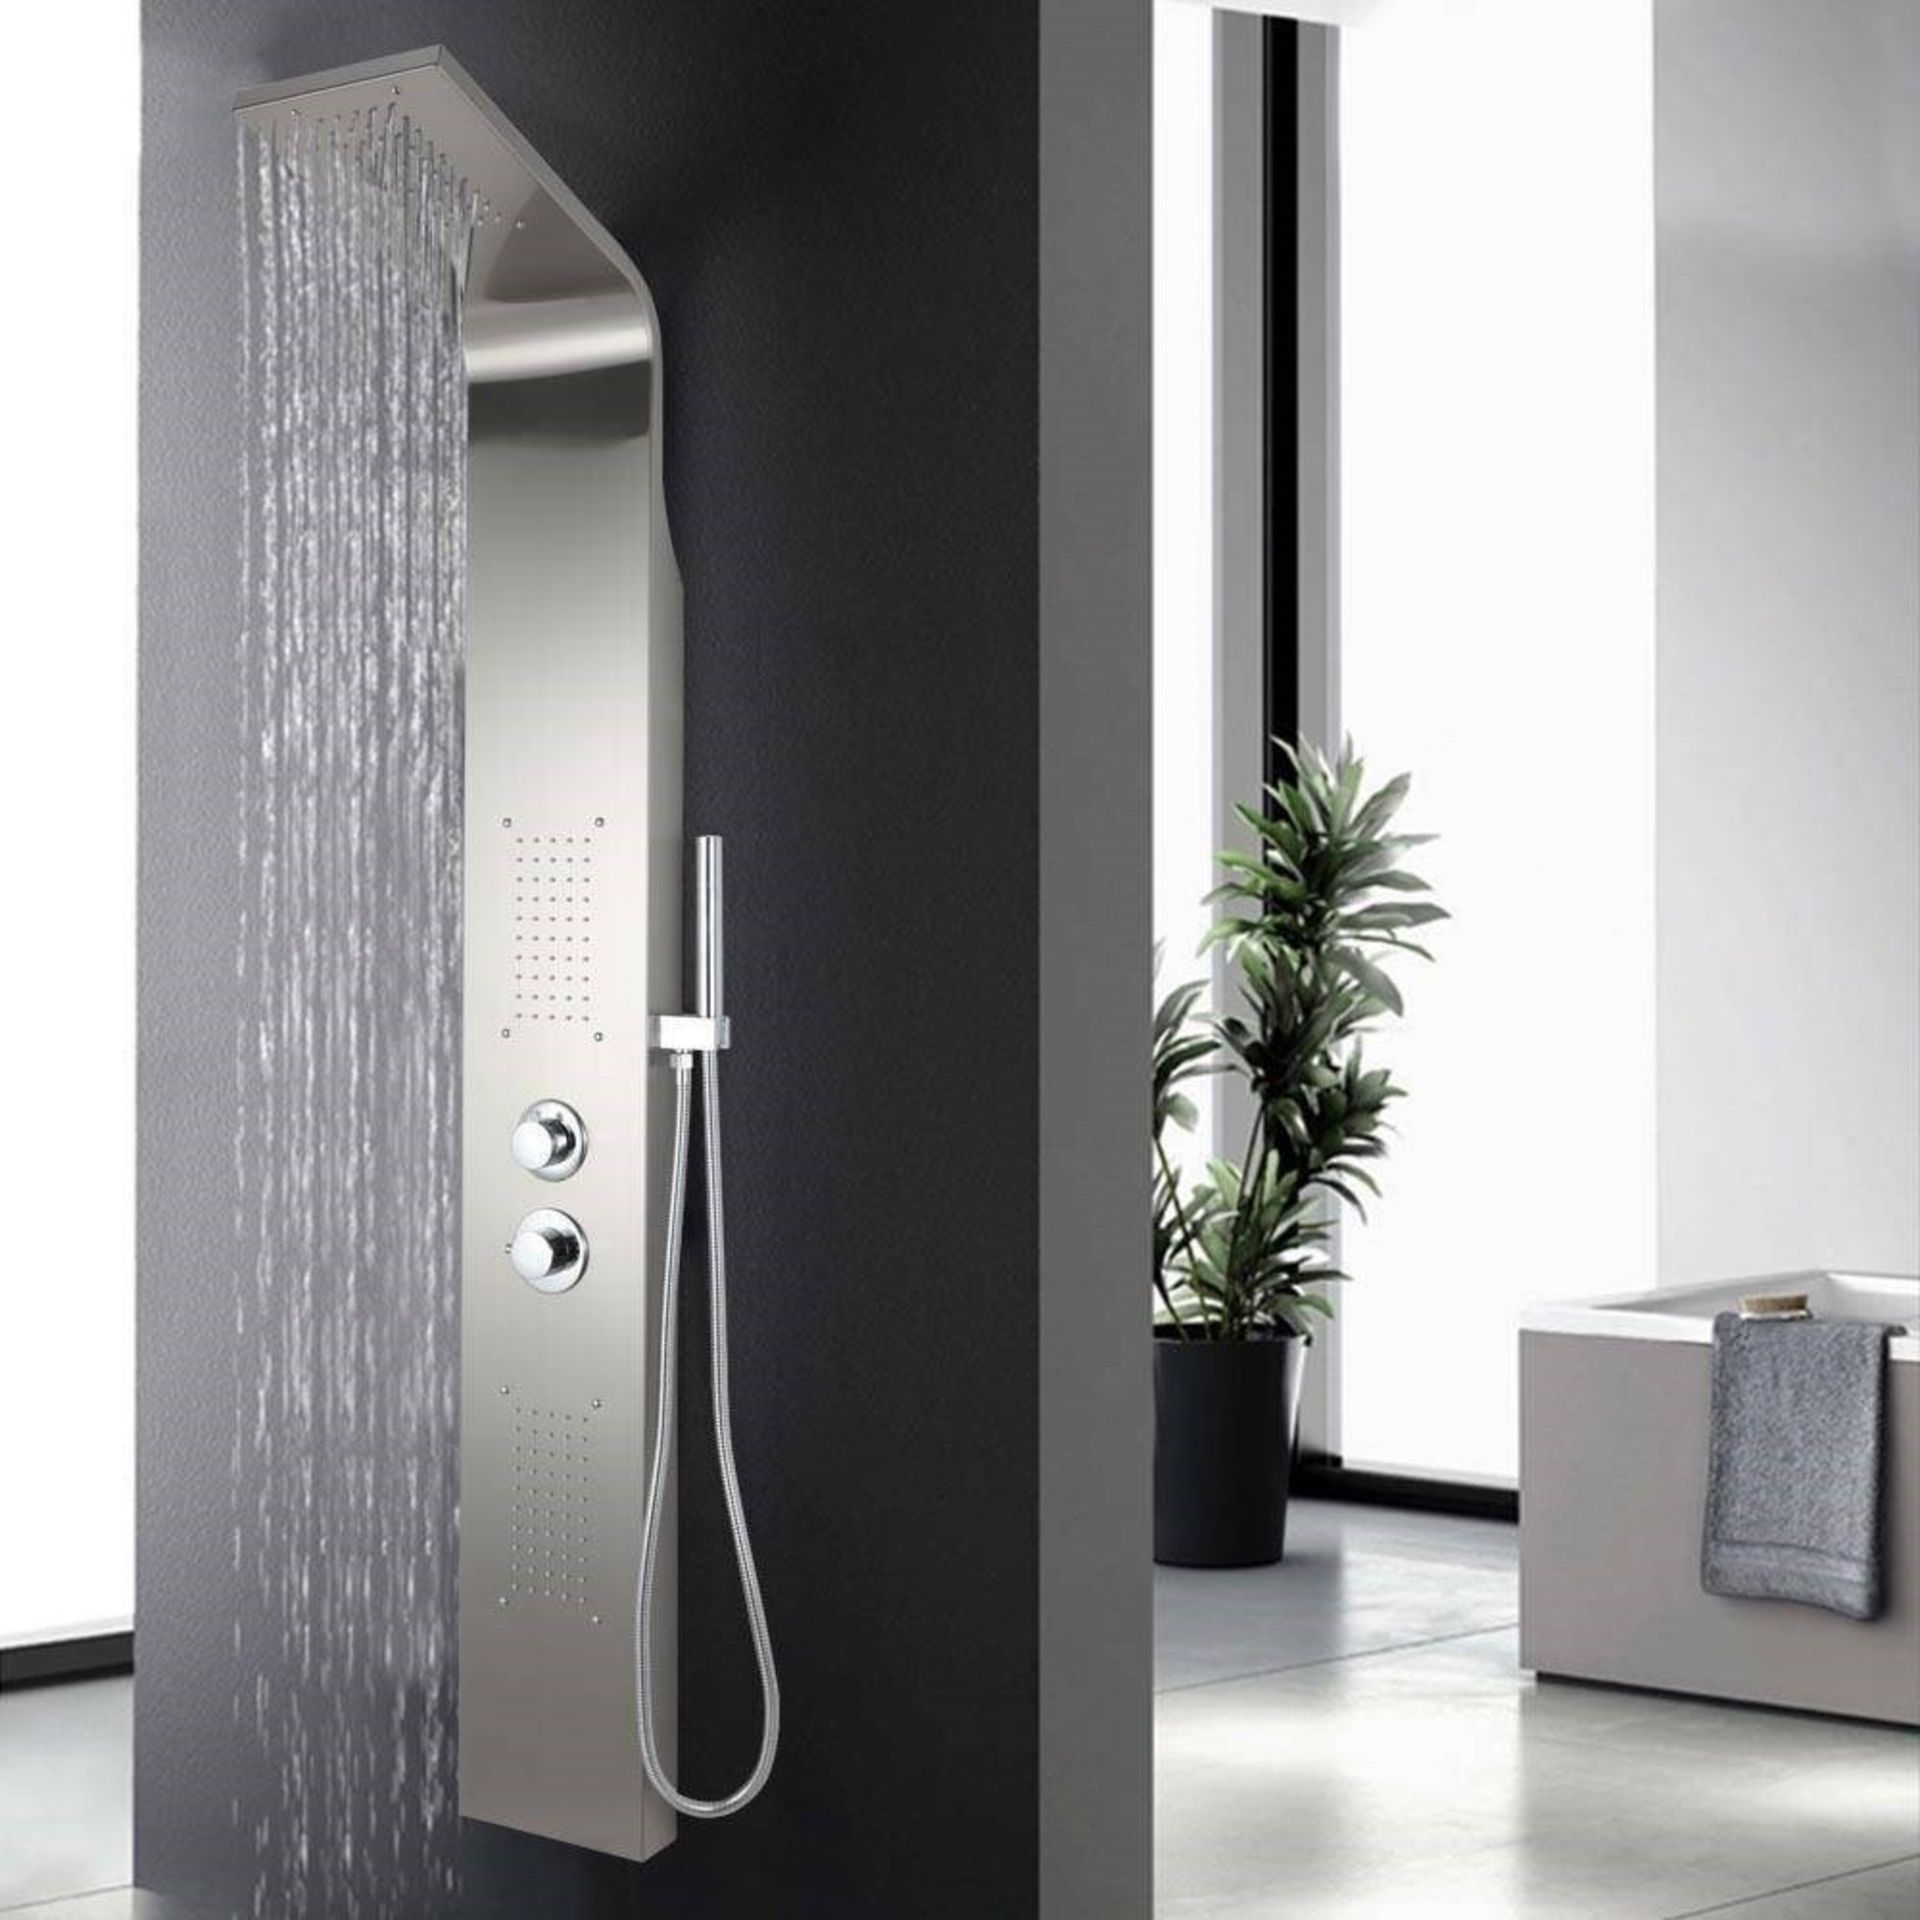 NEW (NS2) Chrome Modern Bathroom Shower Column Tower Panel System With Hand held Massage Jets....